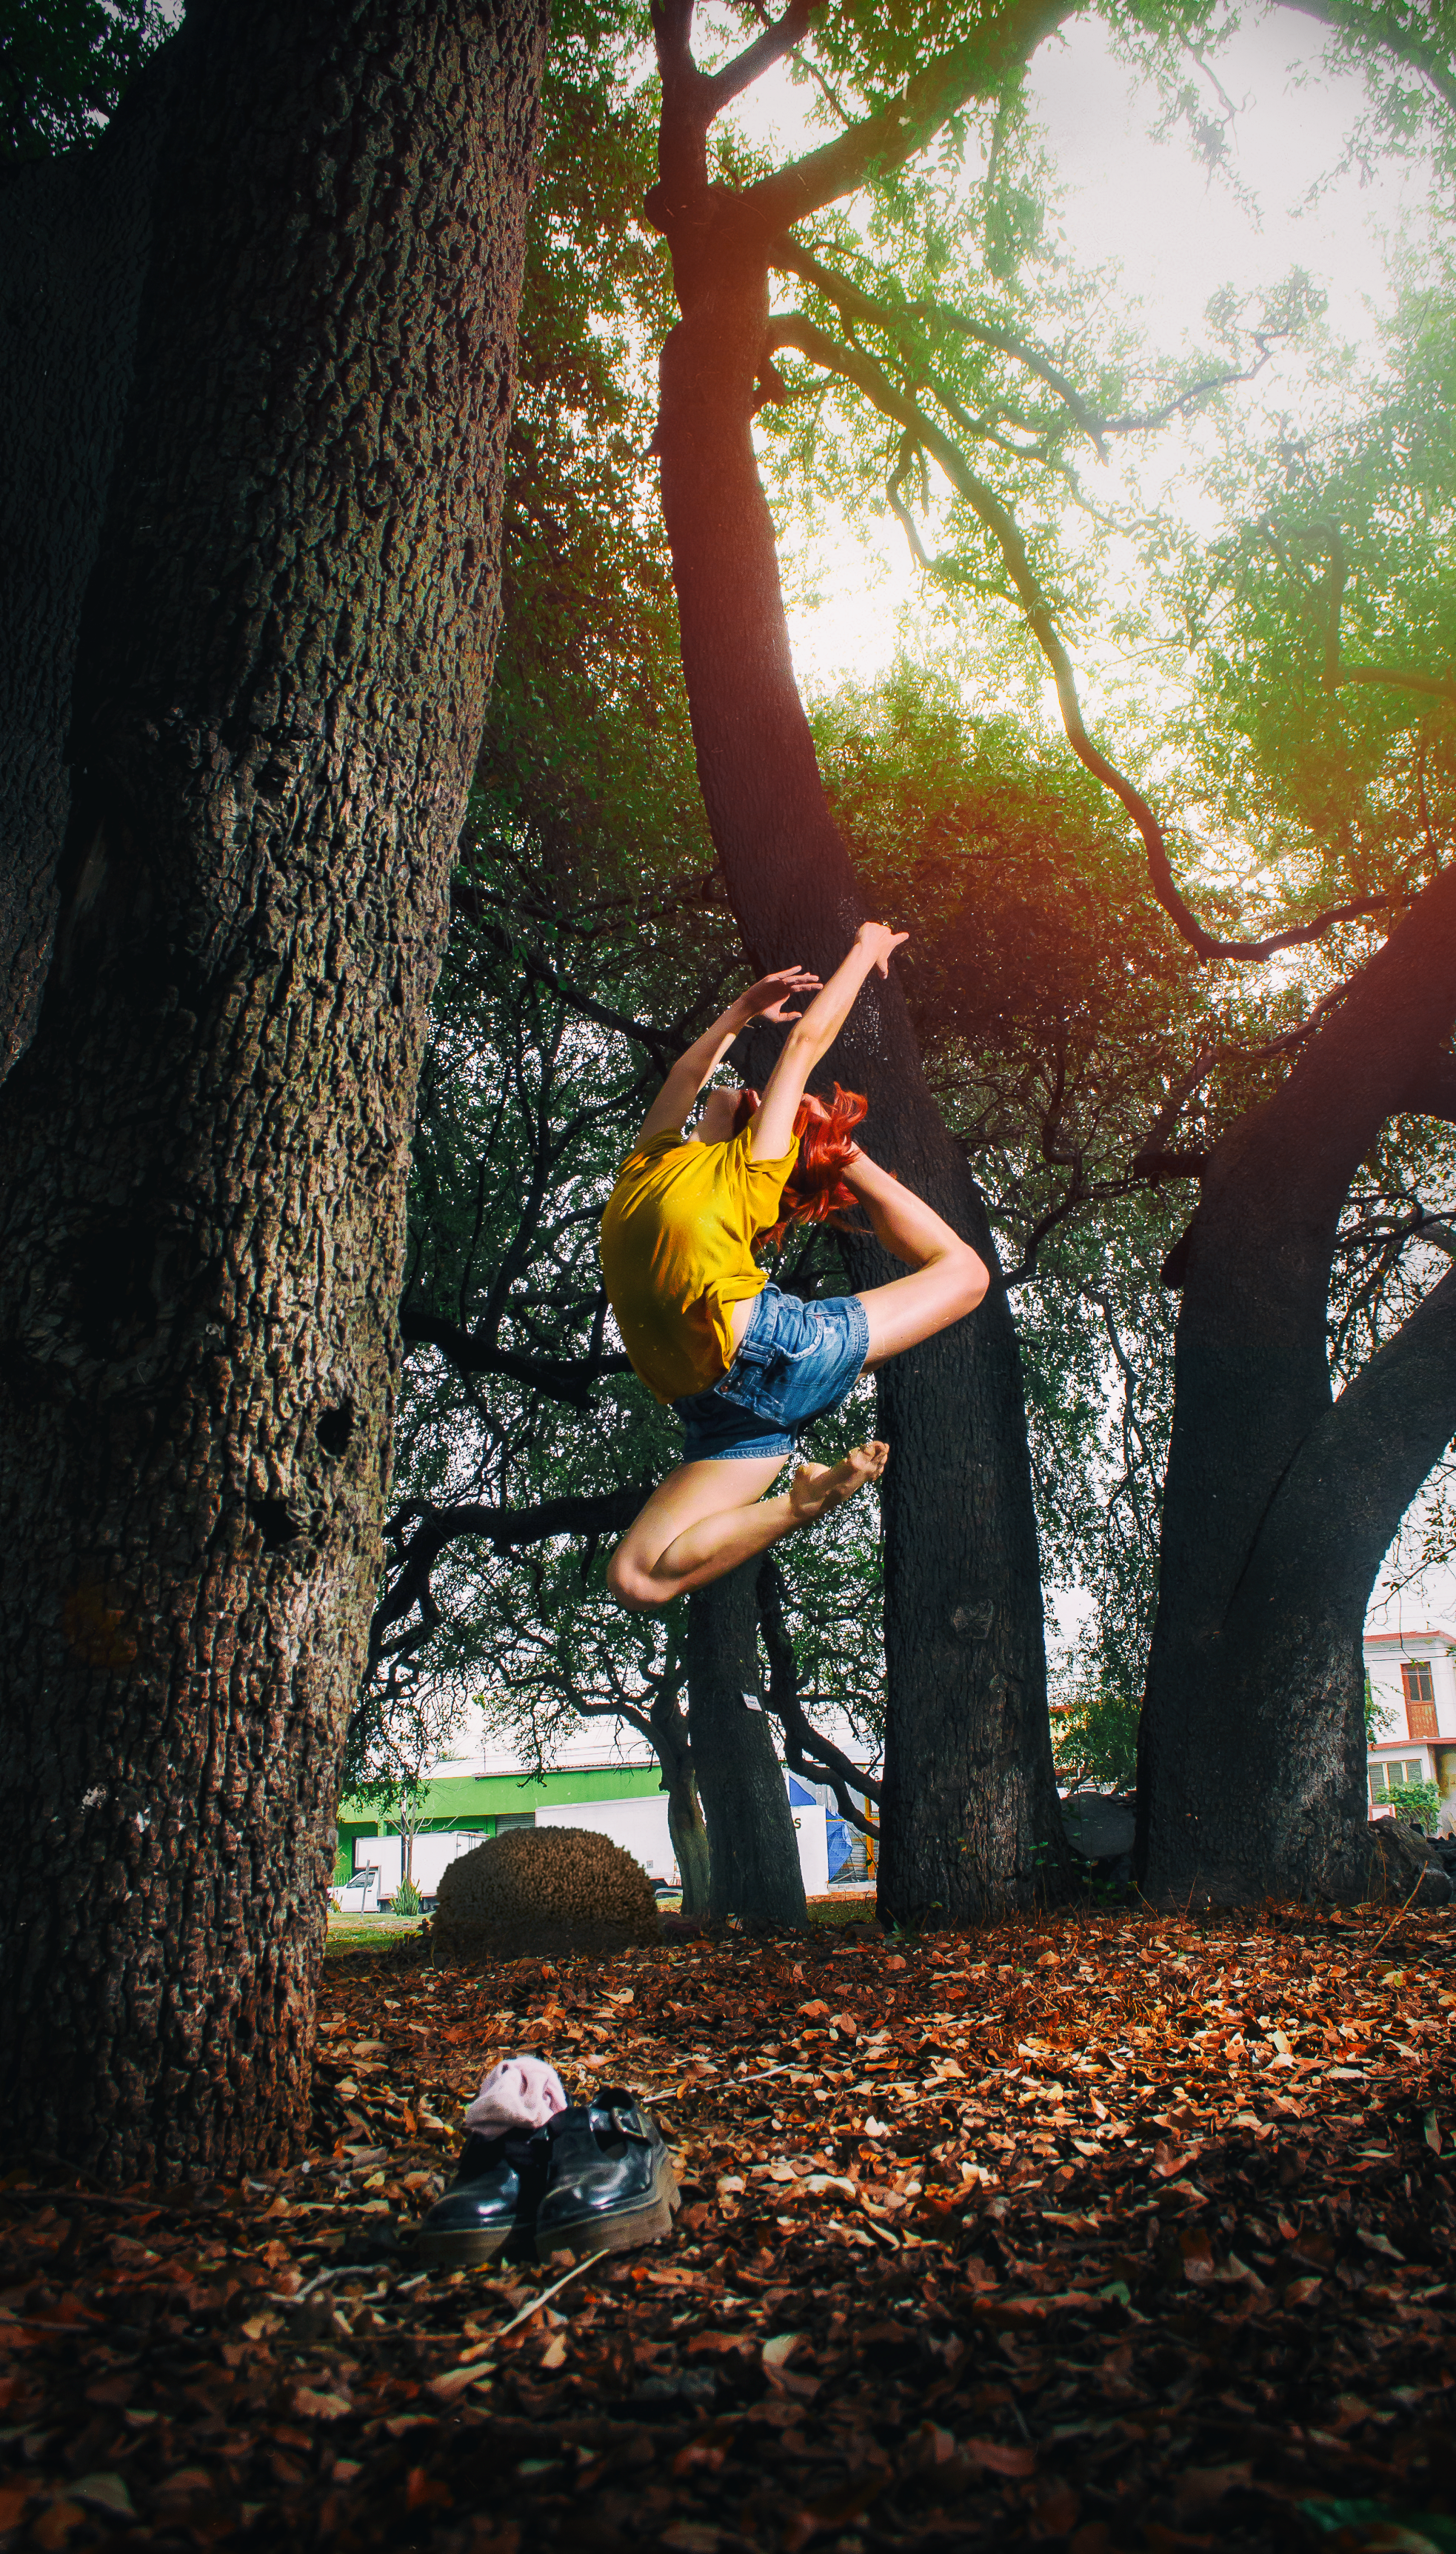 Person in Yellow Shirt and Blue Denim Shorts Doing Ballet Stance on Woods, Outdoors, Young, Woods, Woman, HQ Photo